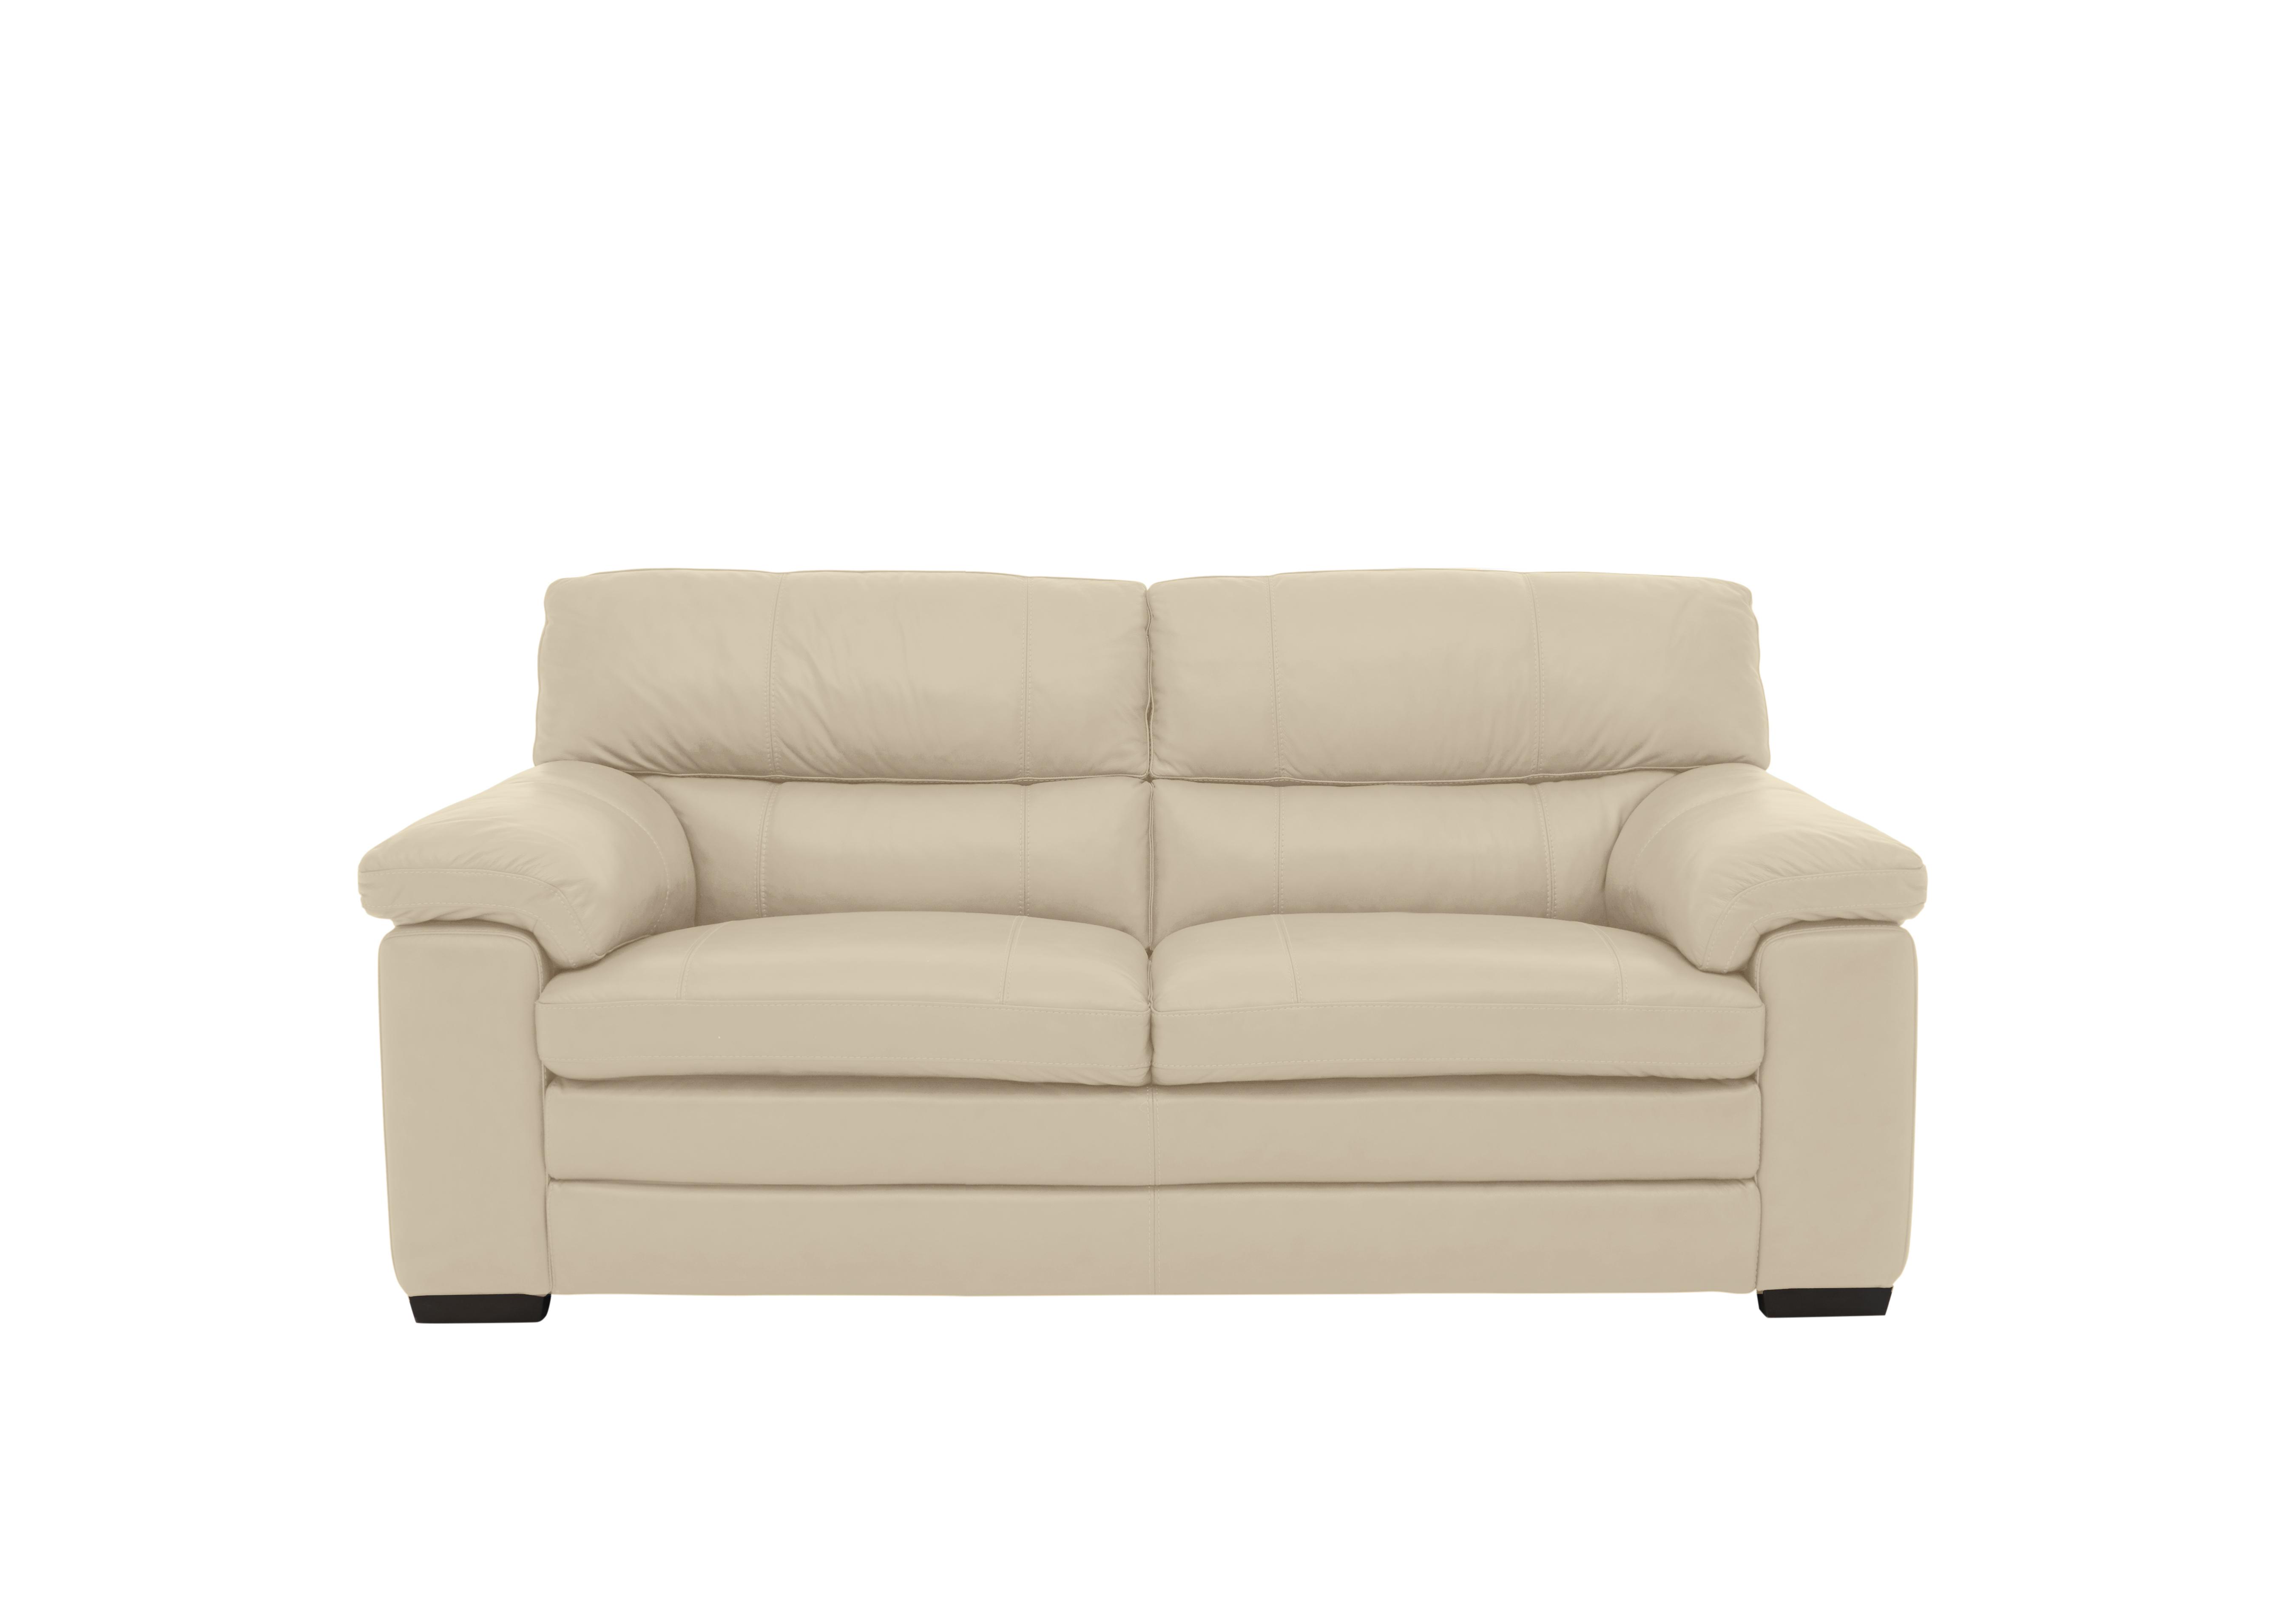 Cozee 2 Seater Pure Premium Leather Sofa in Bv-862c Bisque on Furniture Village